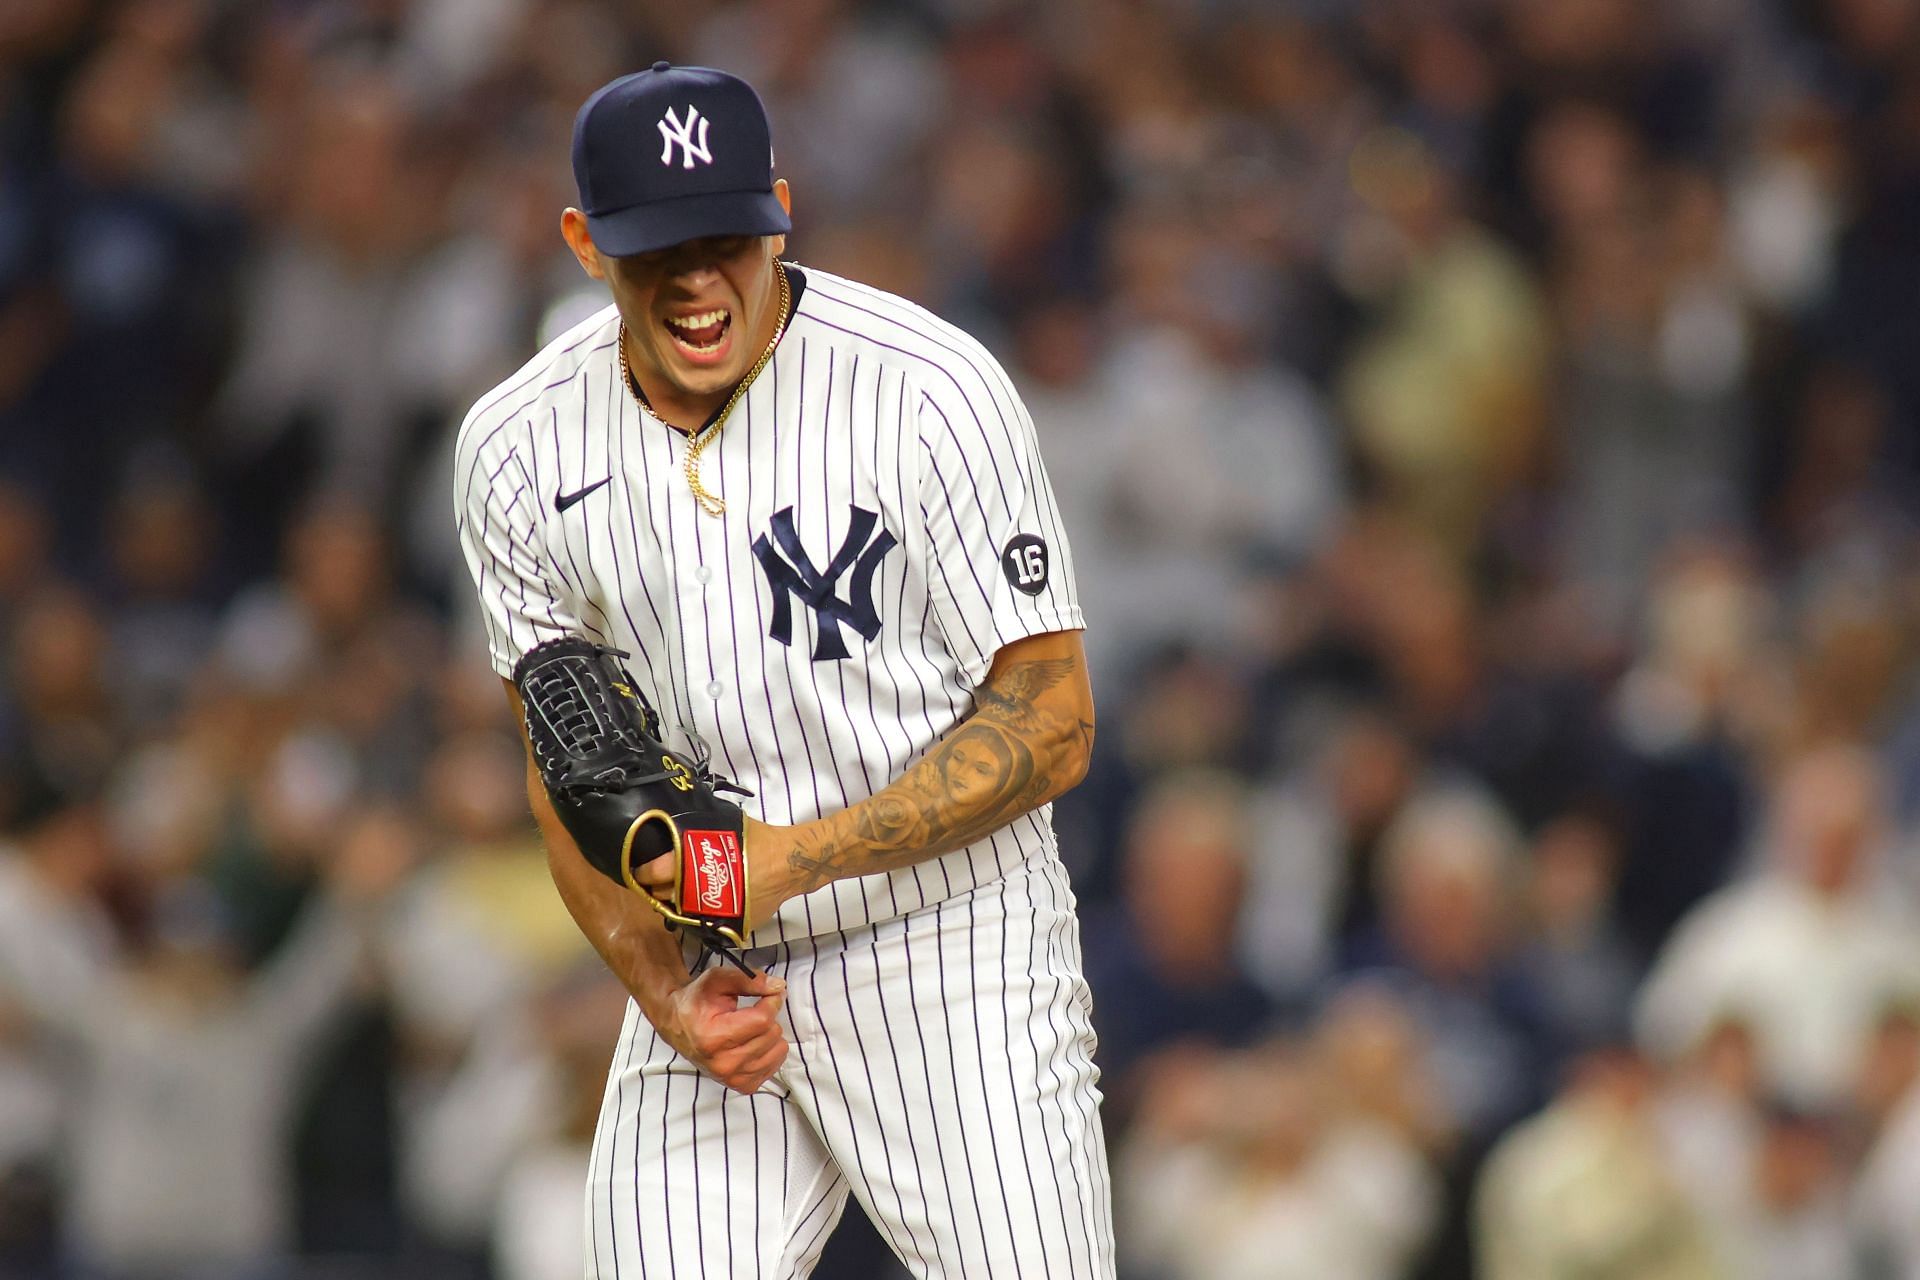 New York Yankees pitcher Jonathan Loaisiga: We want that